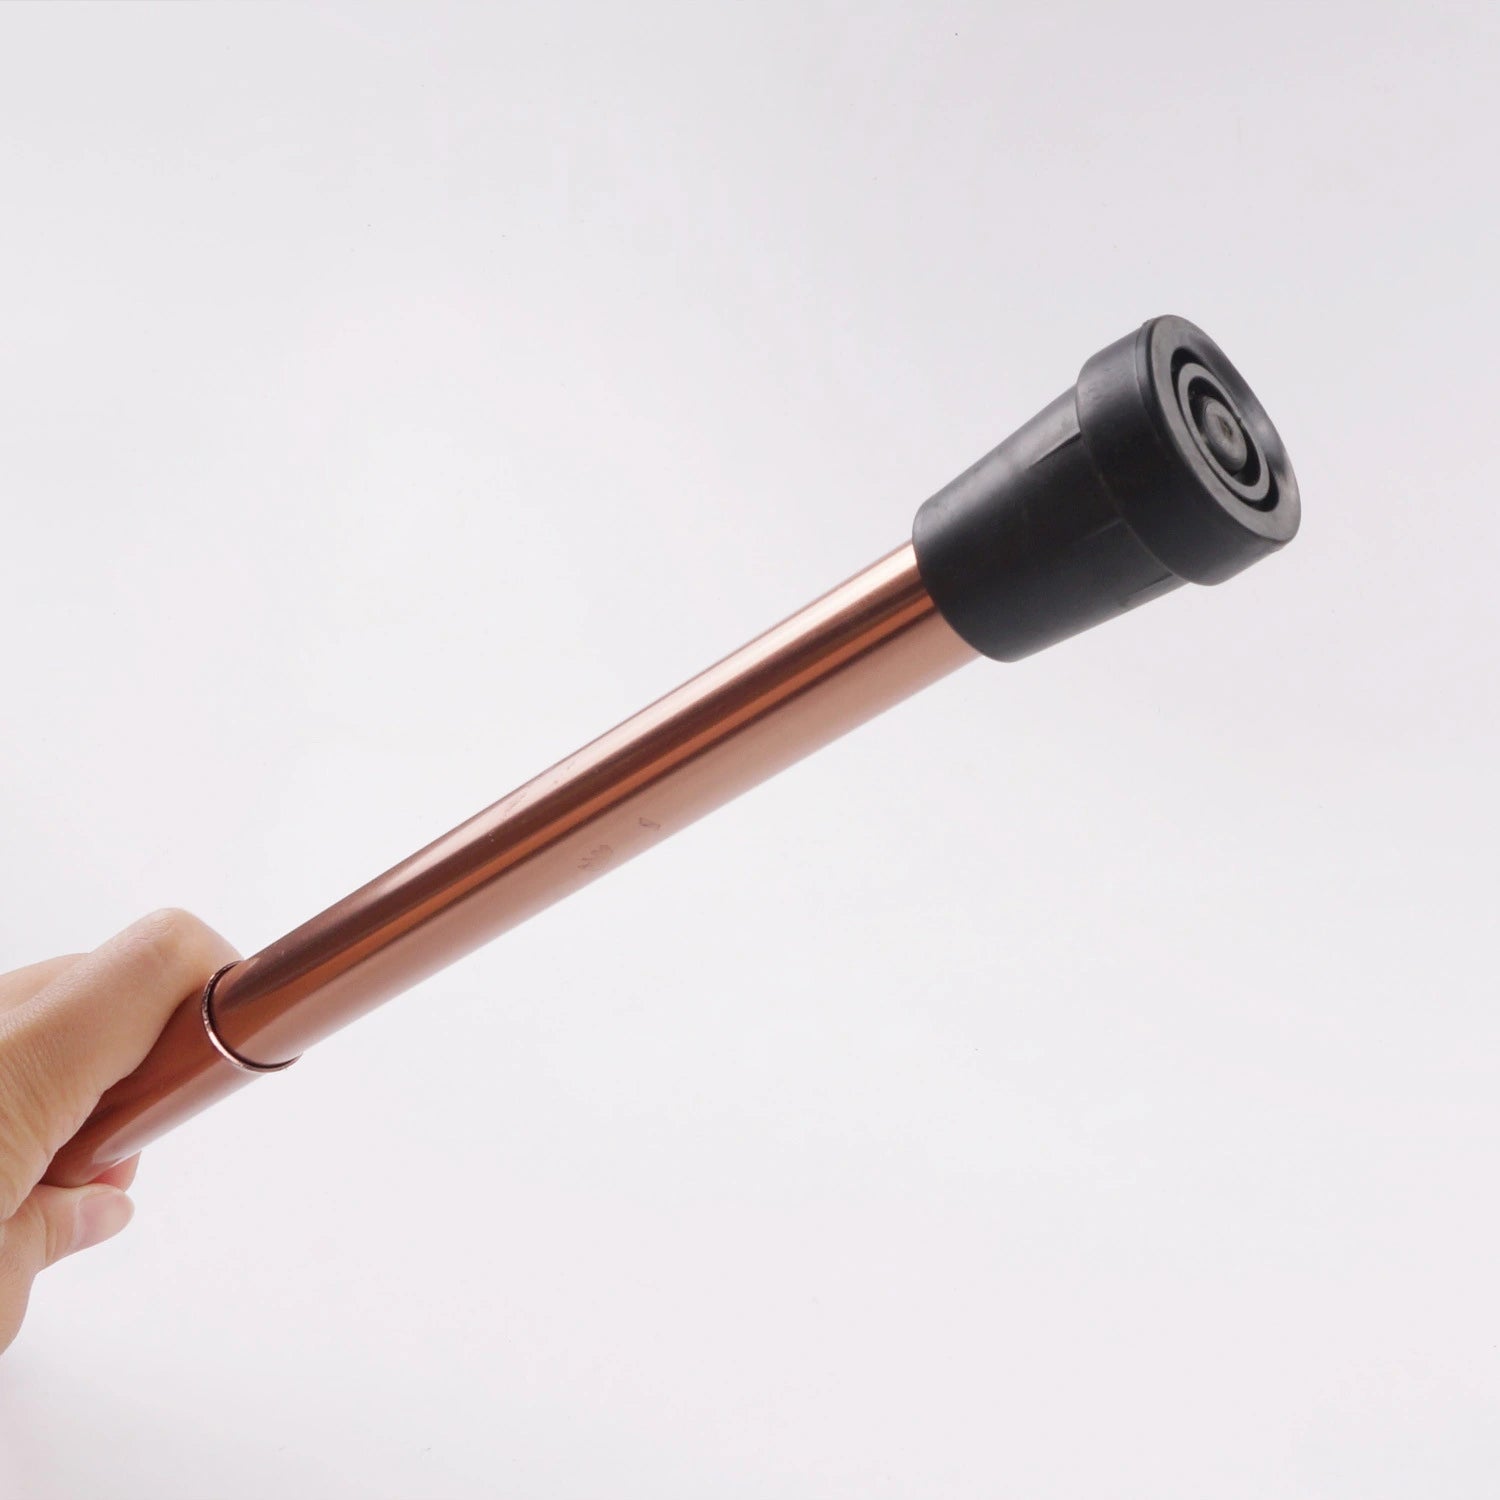  The shaft of the walking stick is a glossy copper color, offering a stylish aesthetic. This close-up view highlights the simplicity and functionality of the design, focusing on the practical aspect of the rubber tip which is essential for safe walking on various surfaces. This type of walking stick is ideal for individuals needing support and balance while walking, combining safety with an elegant appearance.